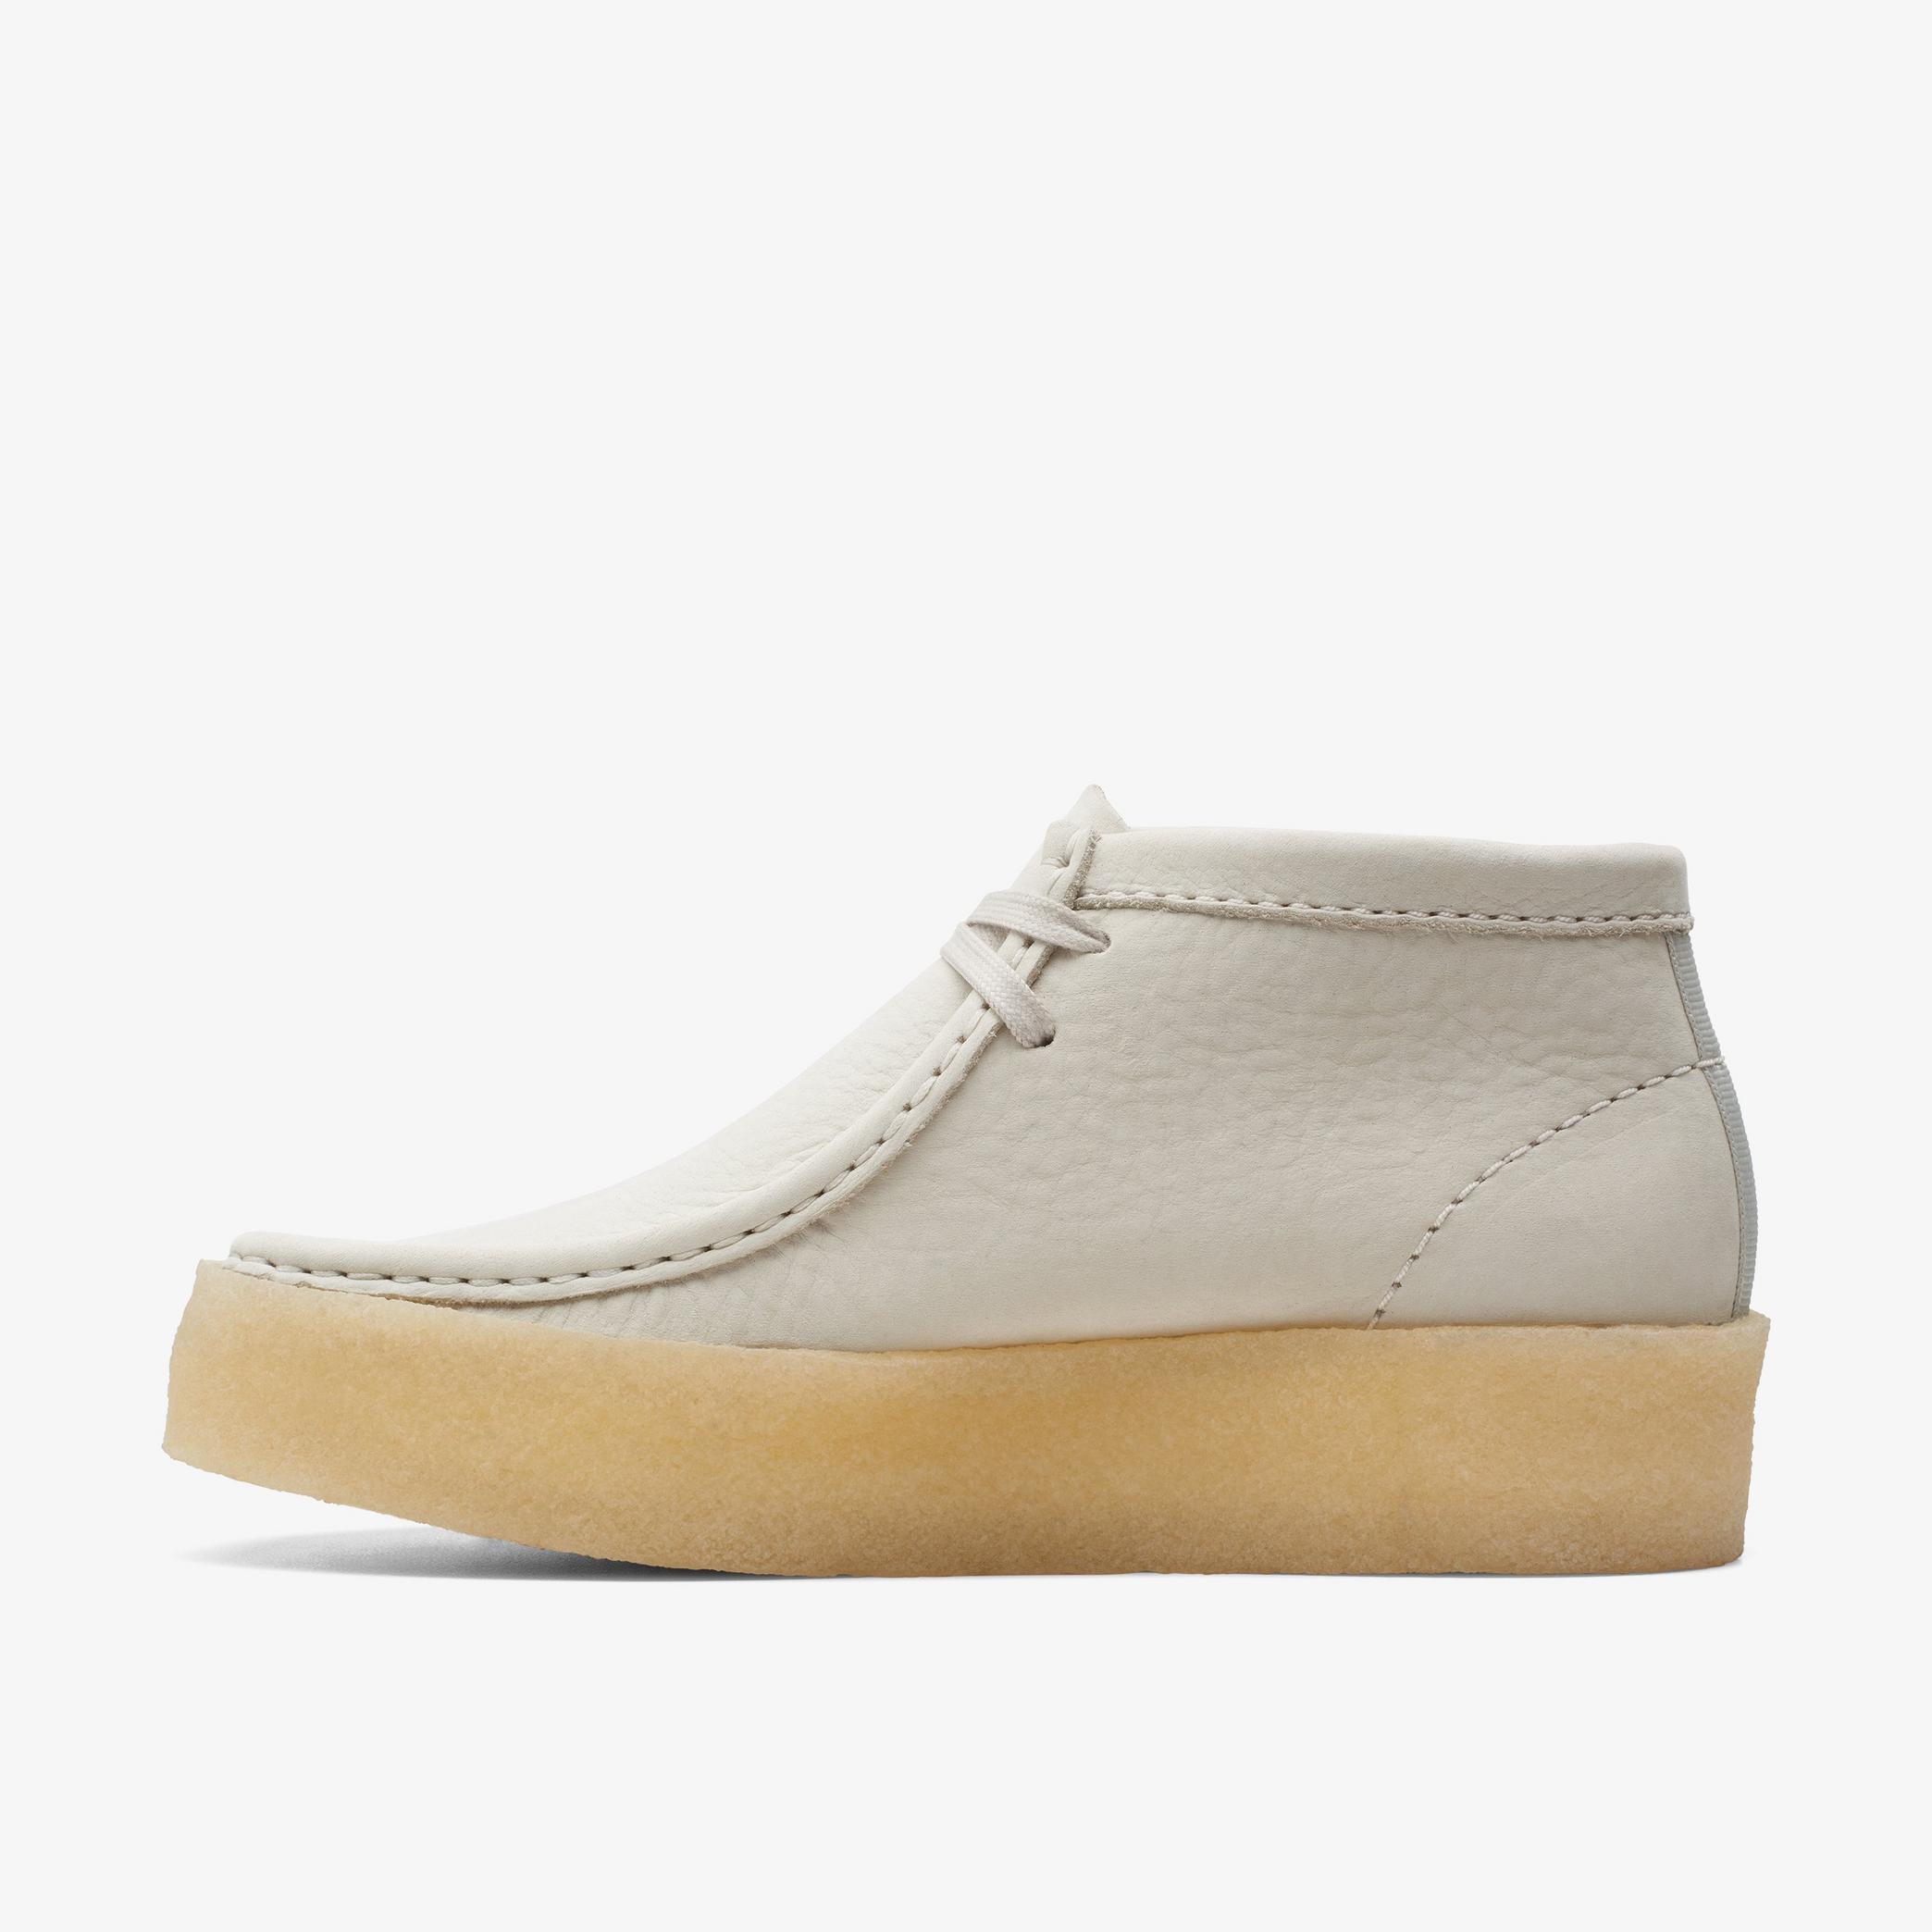 Wallabee Cup Boot White Nubuck Boots, view 2 of 6